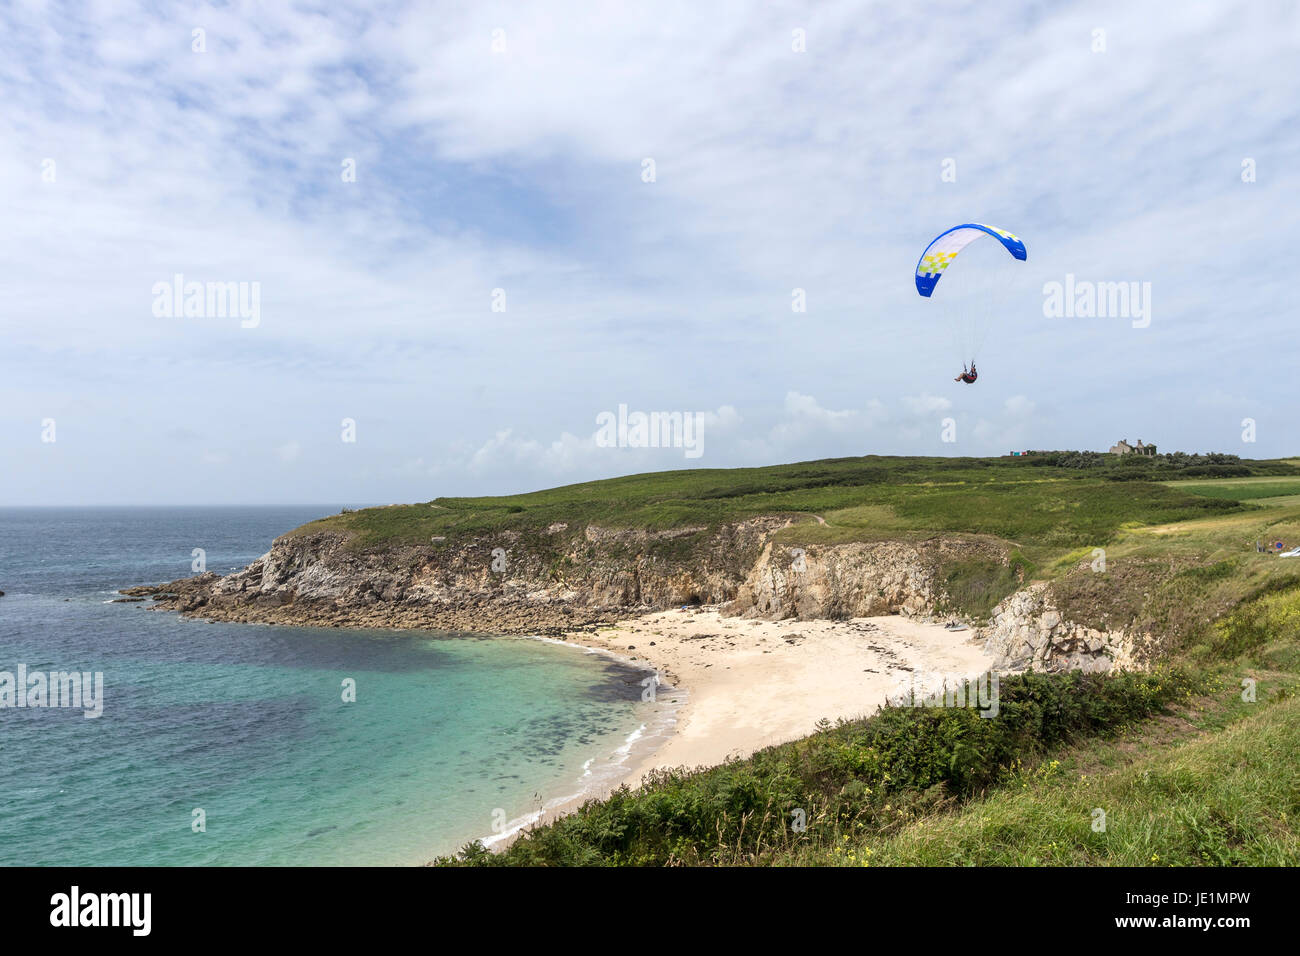 Paraglider Soaring Above the Coast at the Pointe de Corsen, Plouarzel, Bittany, France Stock Photo